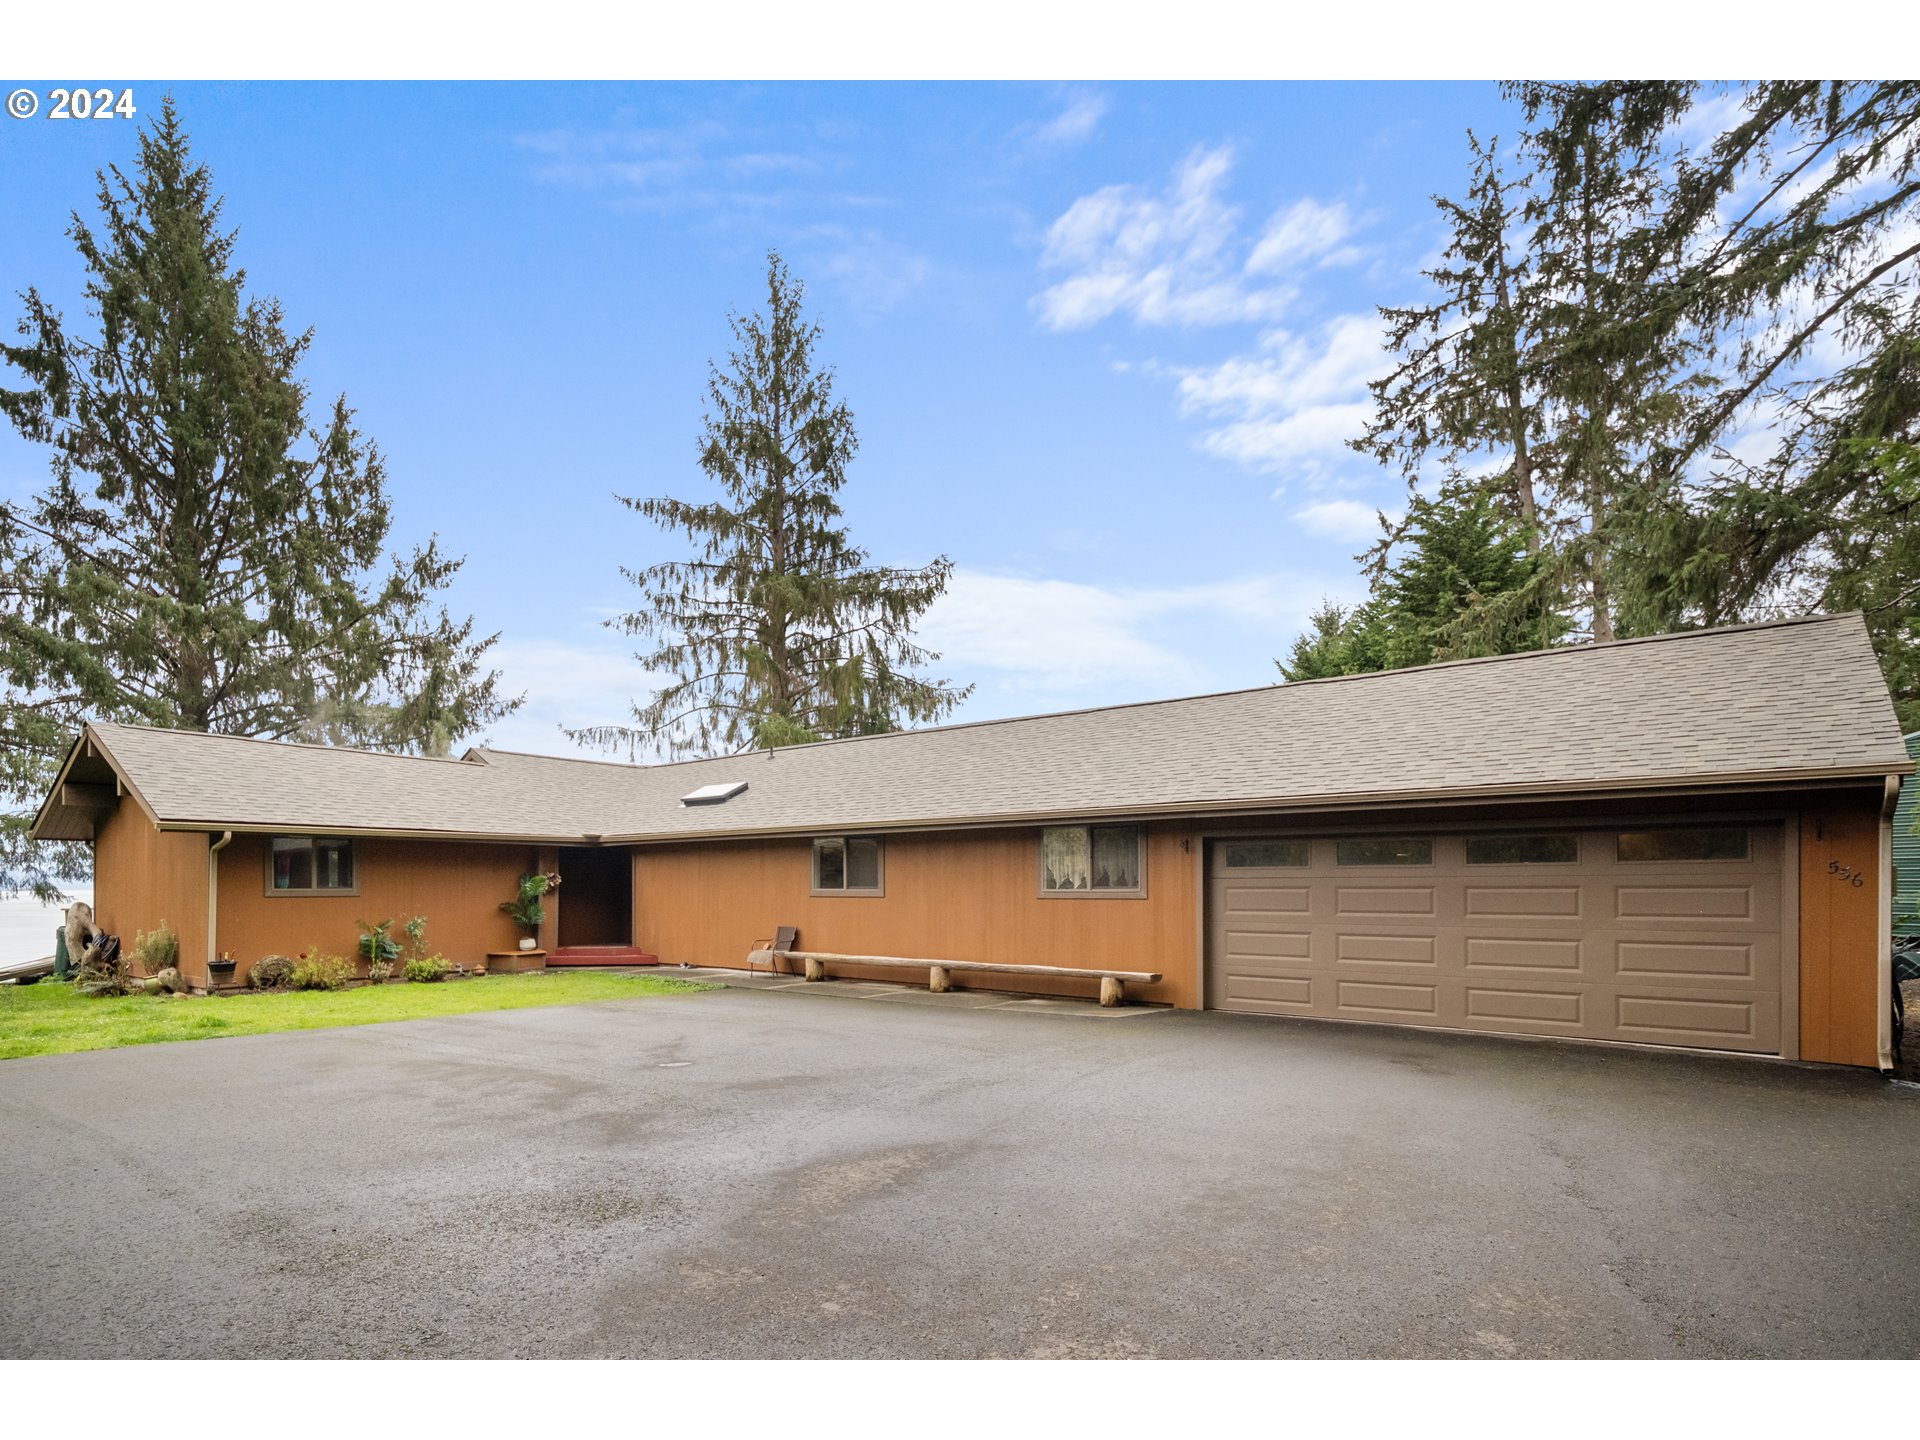 556 STATE ROUTE 401, Naselle, WA 